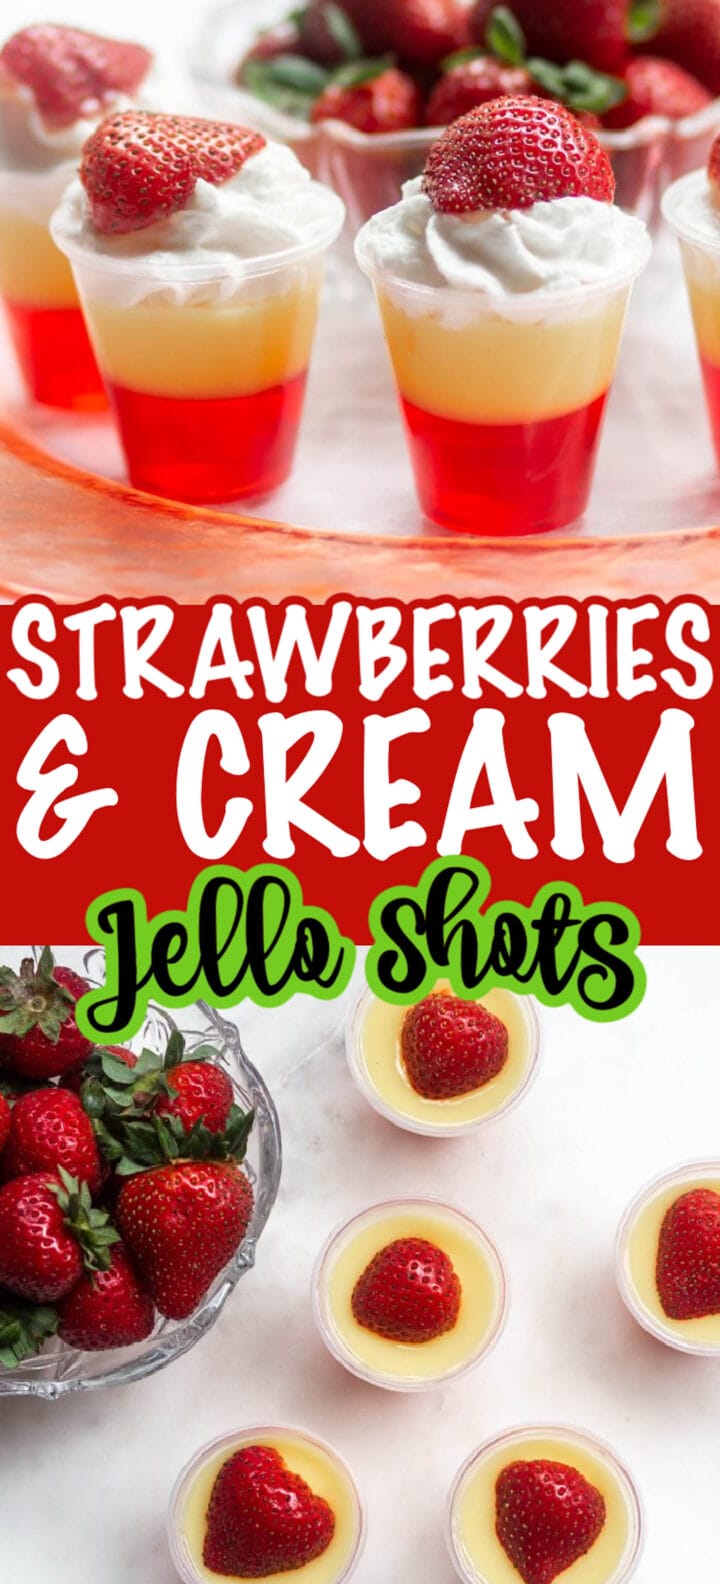 Strawberries and cream layered jello shots featuring a refreshing combination of fruity strawberries and smooth creamy layers.